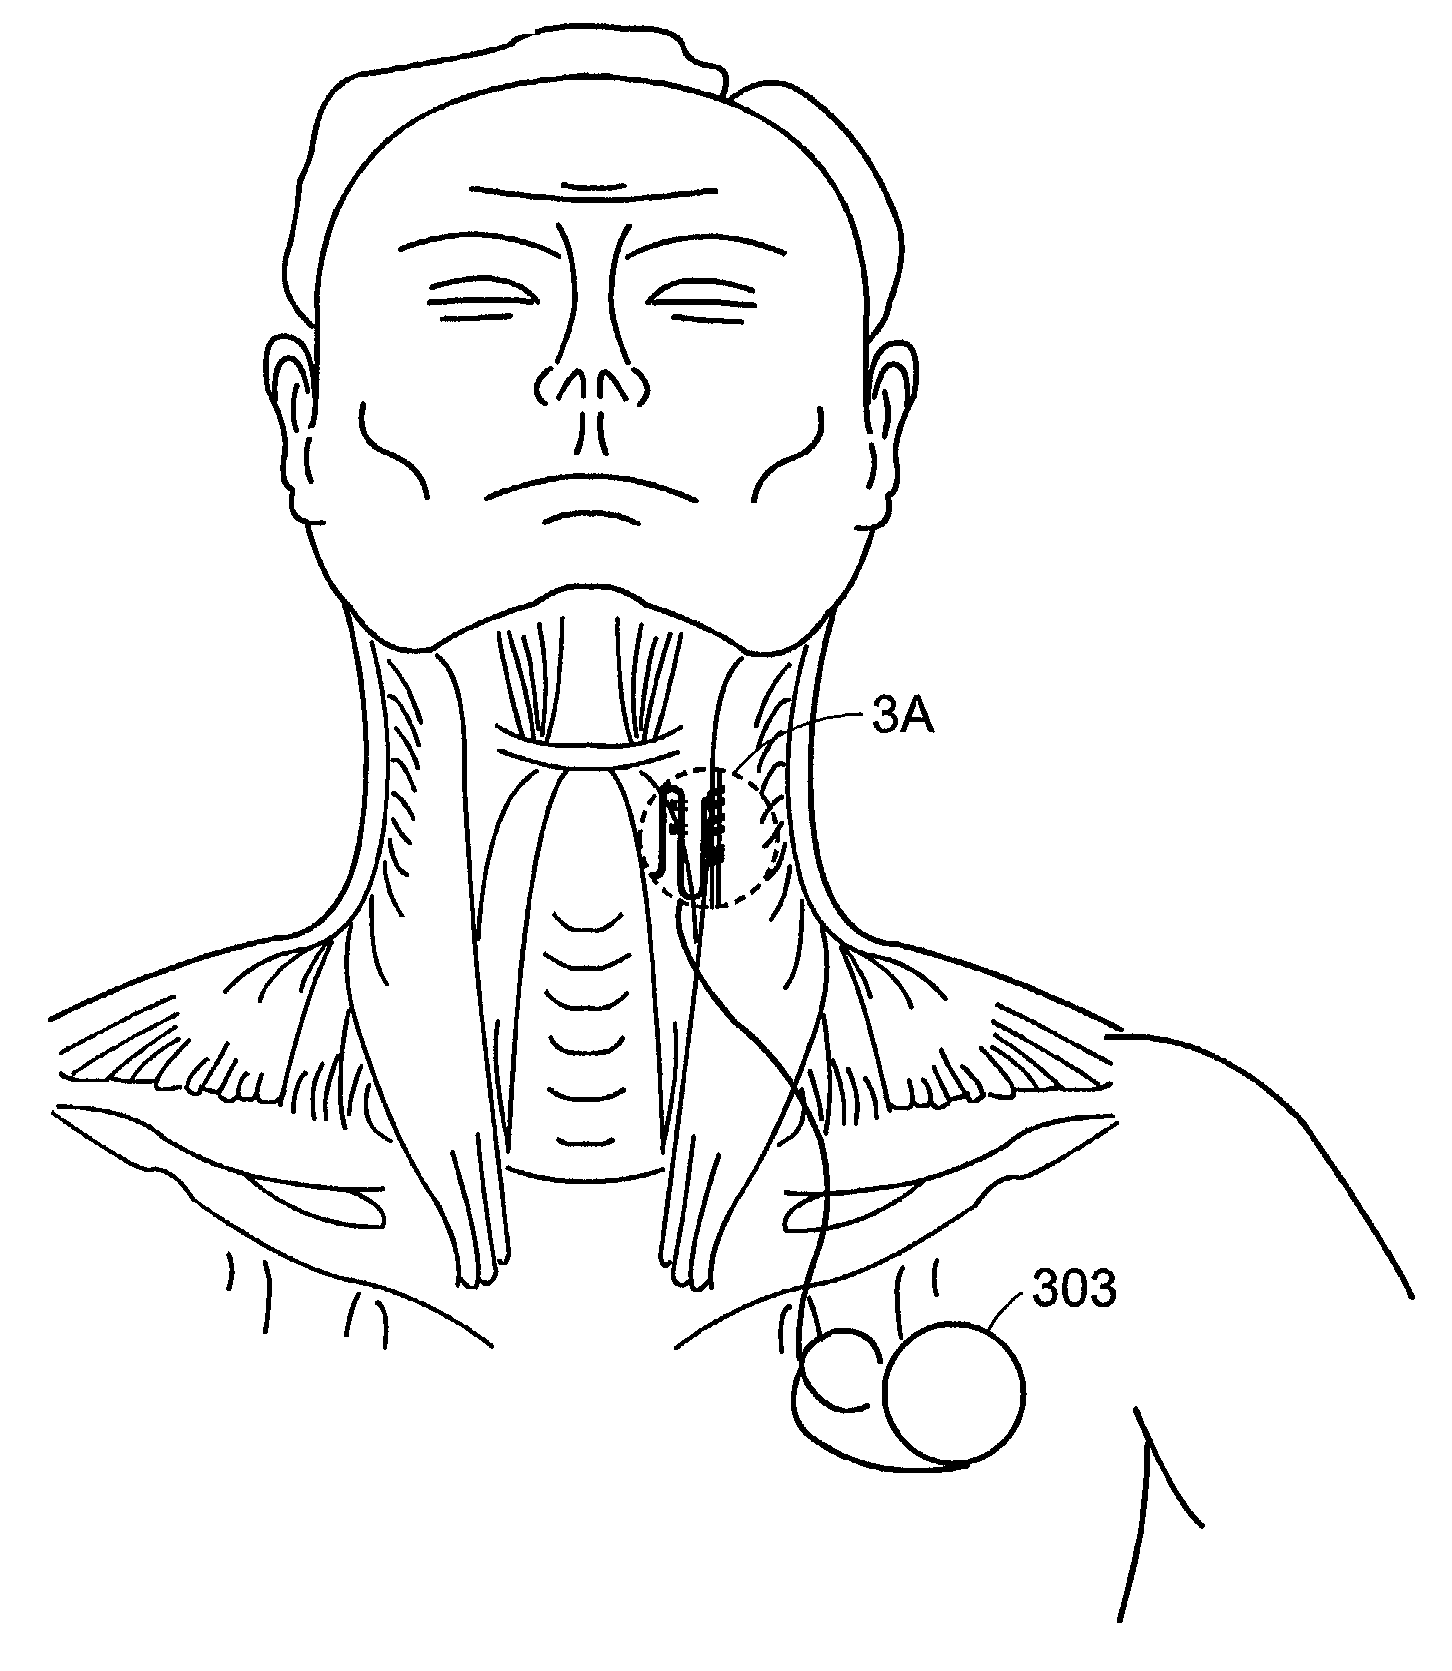 Pacemaker for bilateral vocal cord autoparalysis